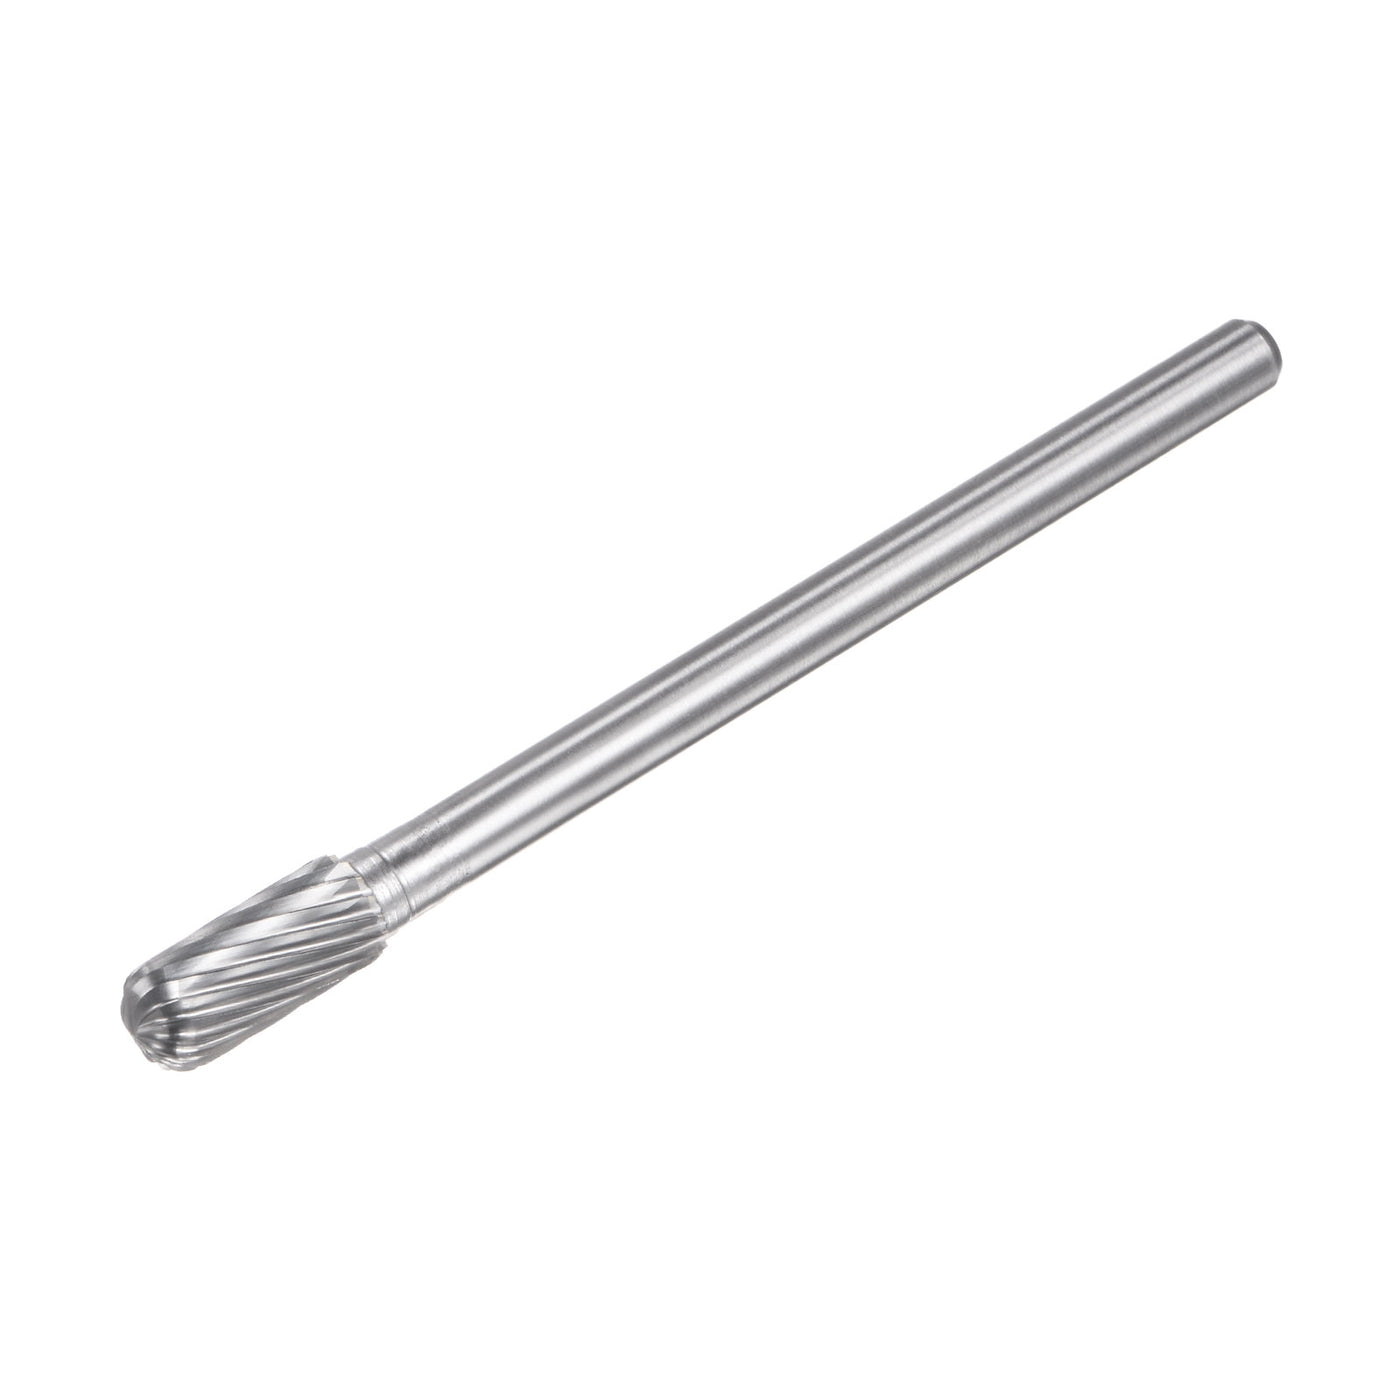 uxcell Uxcell 8mm x 100mm 6mm Shank Single Cut Cylinder with Ball Nose Carbide Tip Rotary File